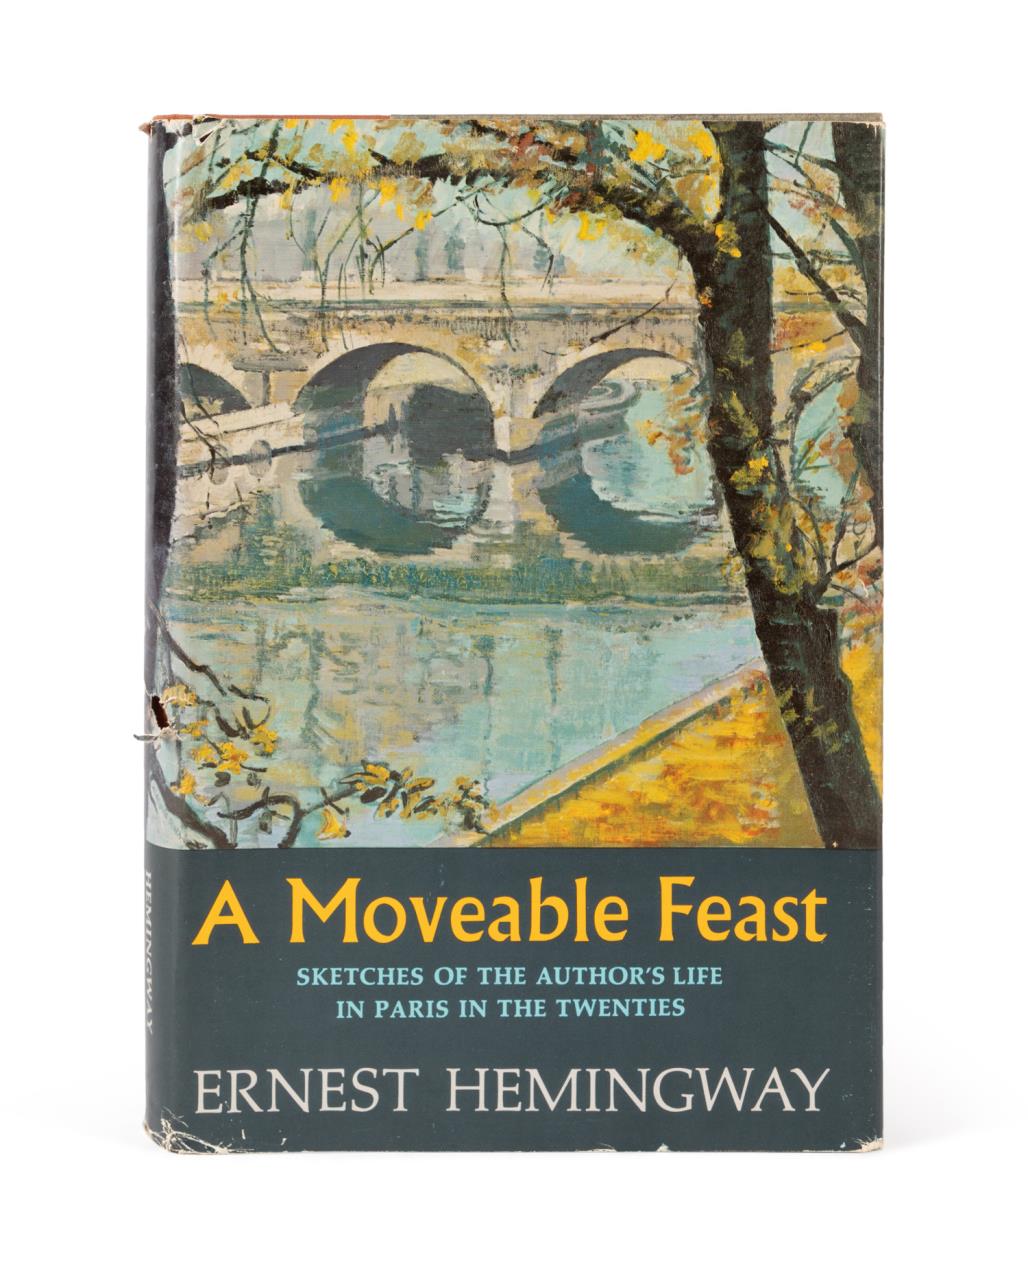 ERNEST HEMINGWAY 'A MOVEABLE FEAST'